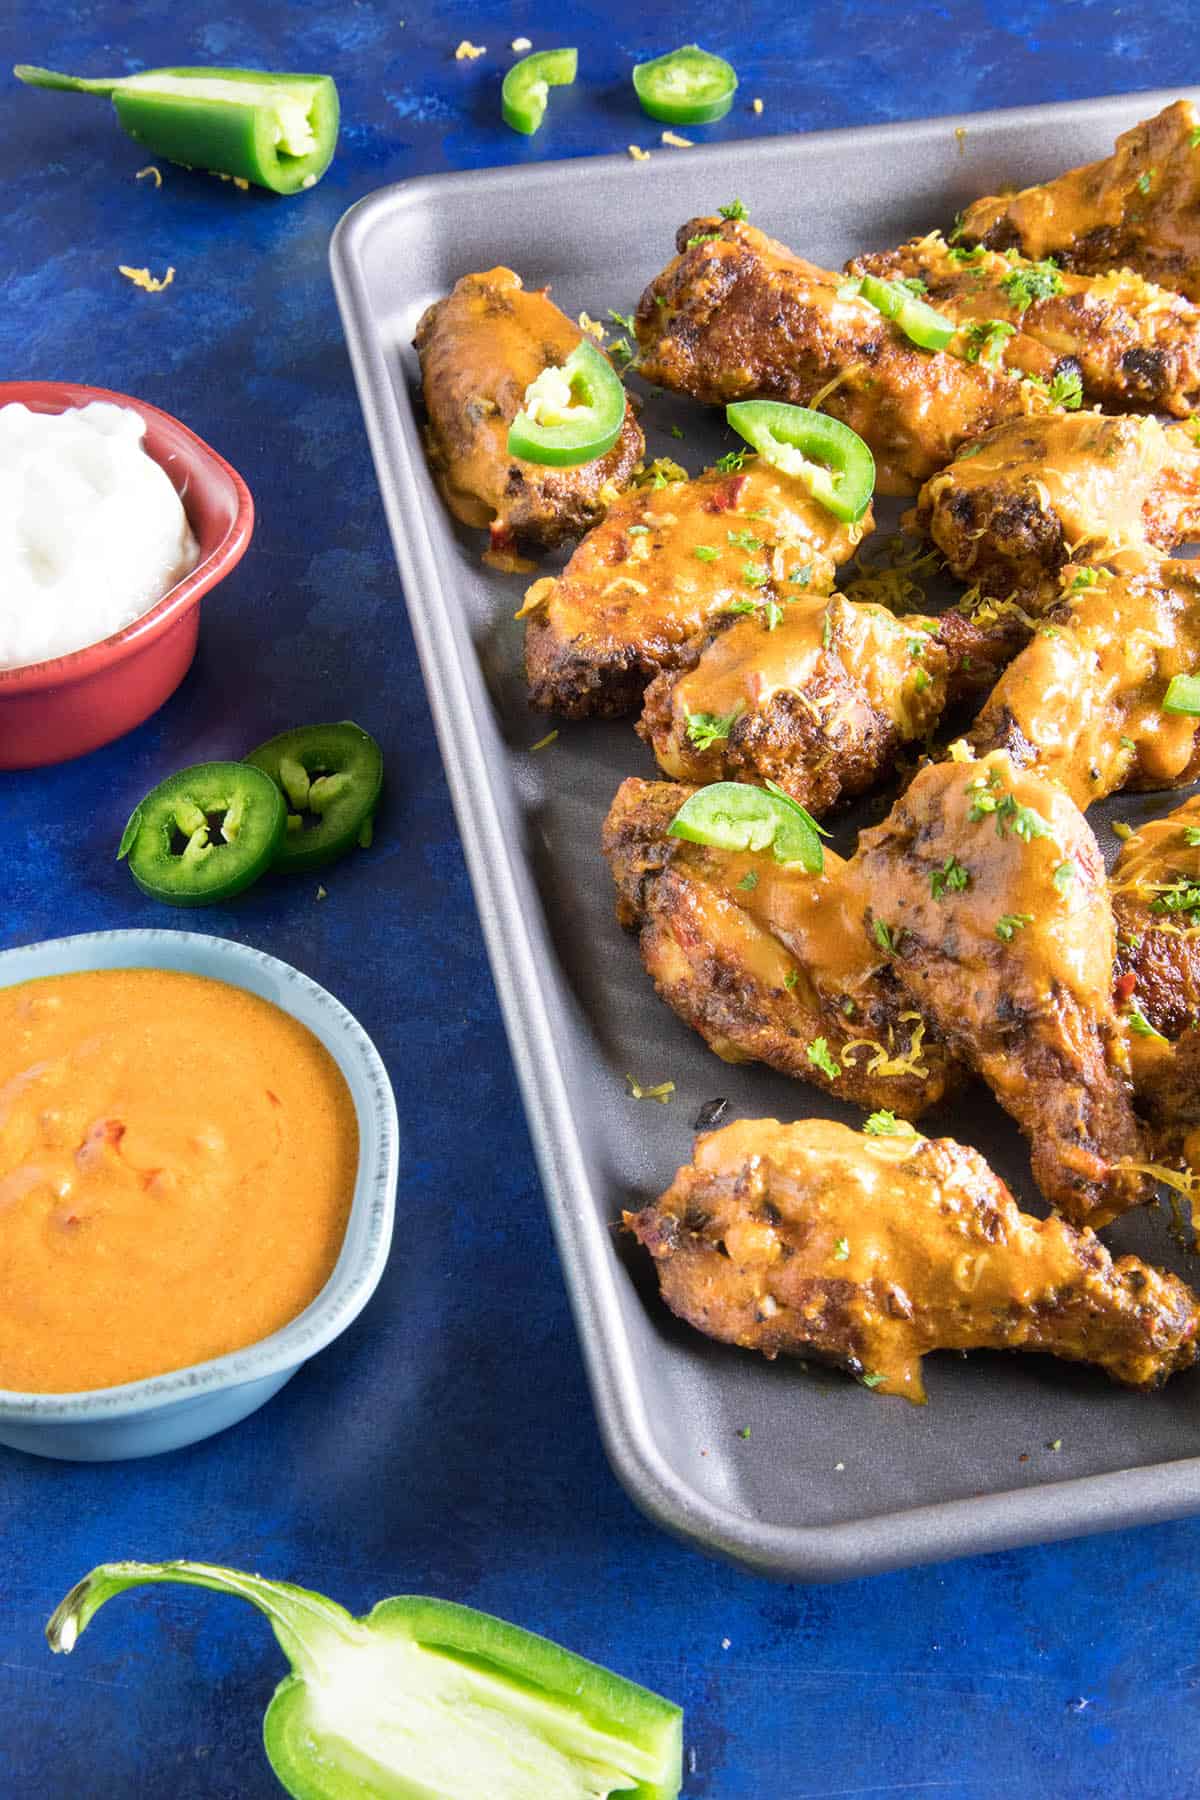 Jalapeno Cheddar Chicken Wings - Get the Recipe Below